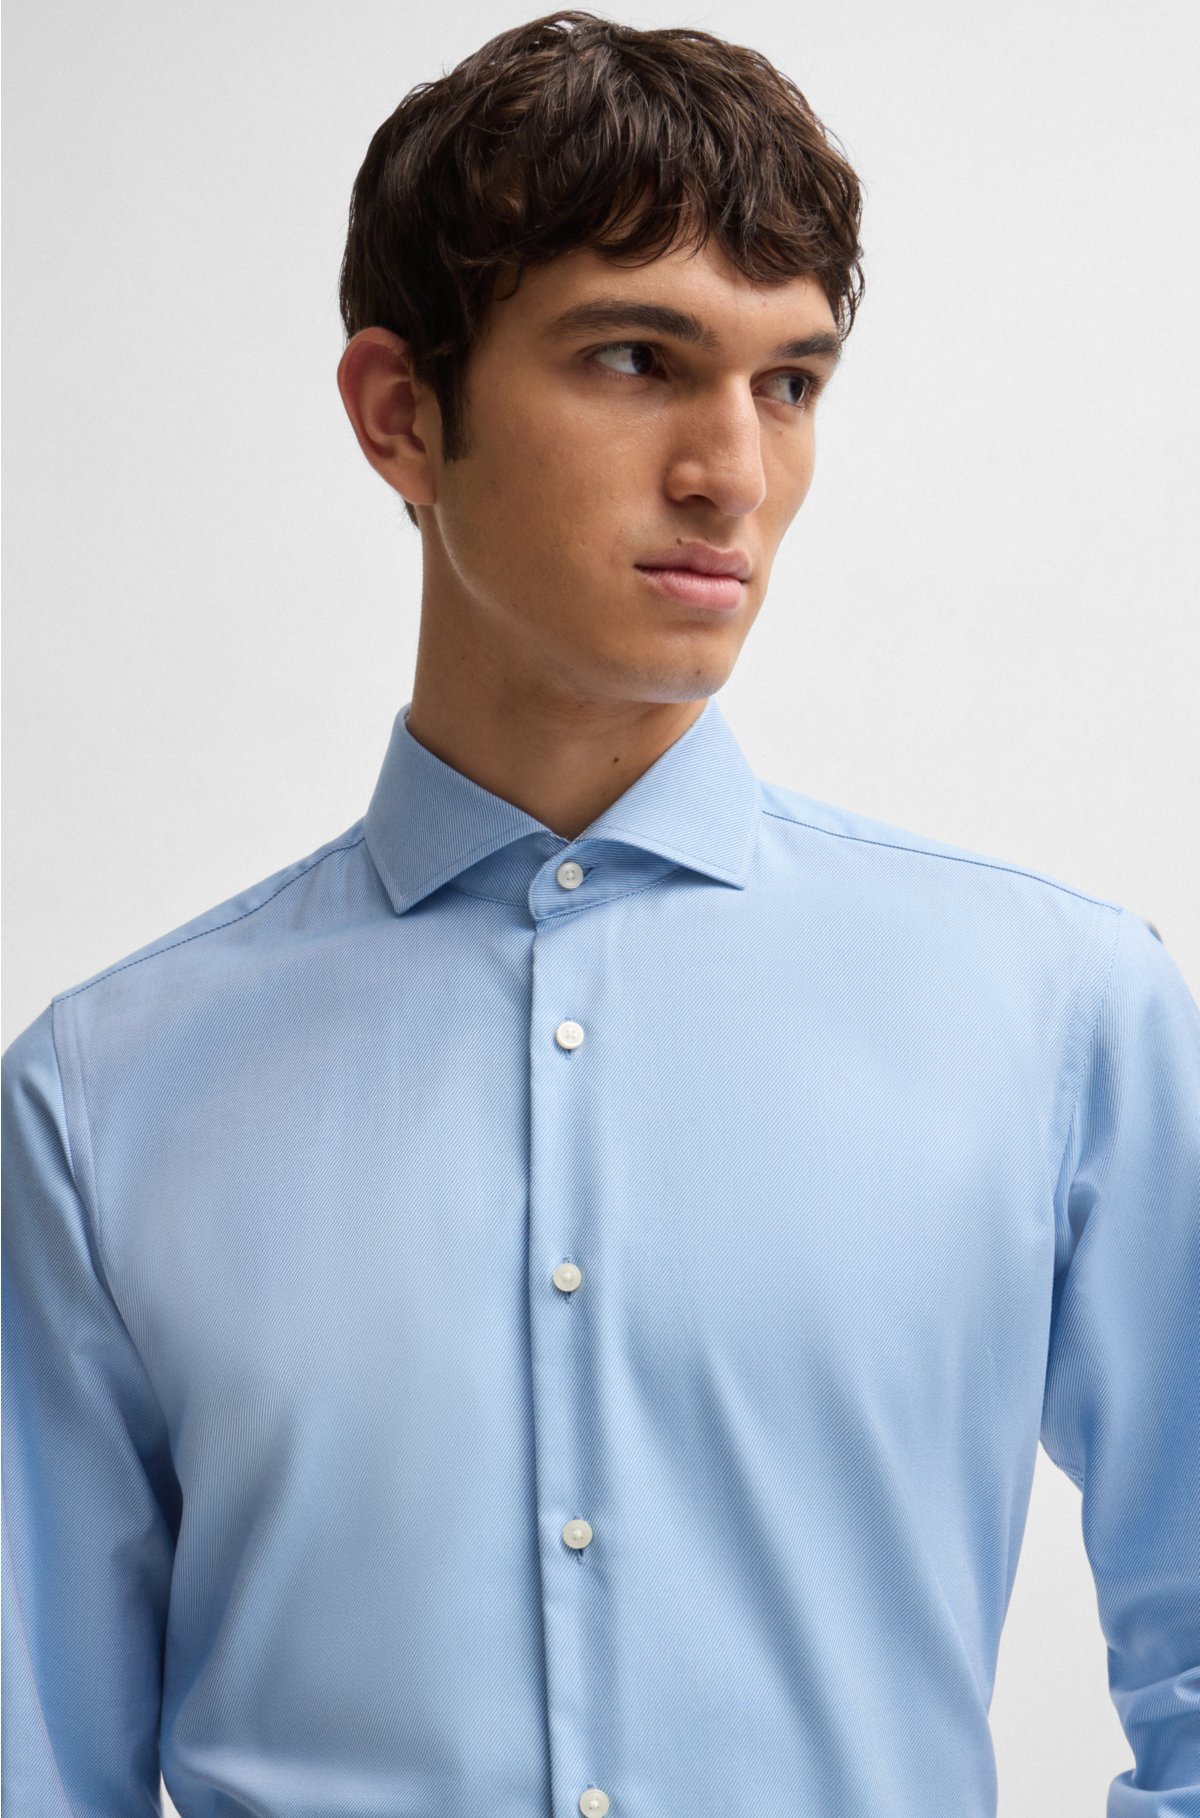 Regular-fit shirt in easy-iron stretch-cotton twill, Light Blue